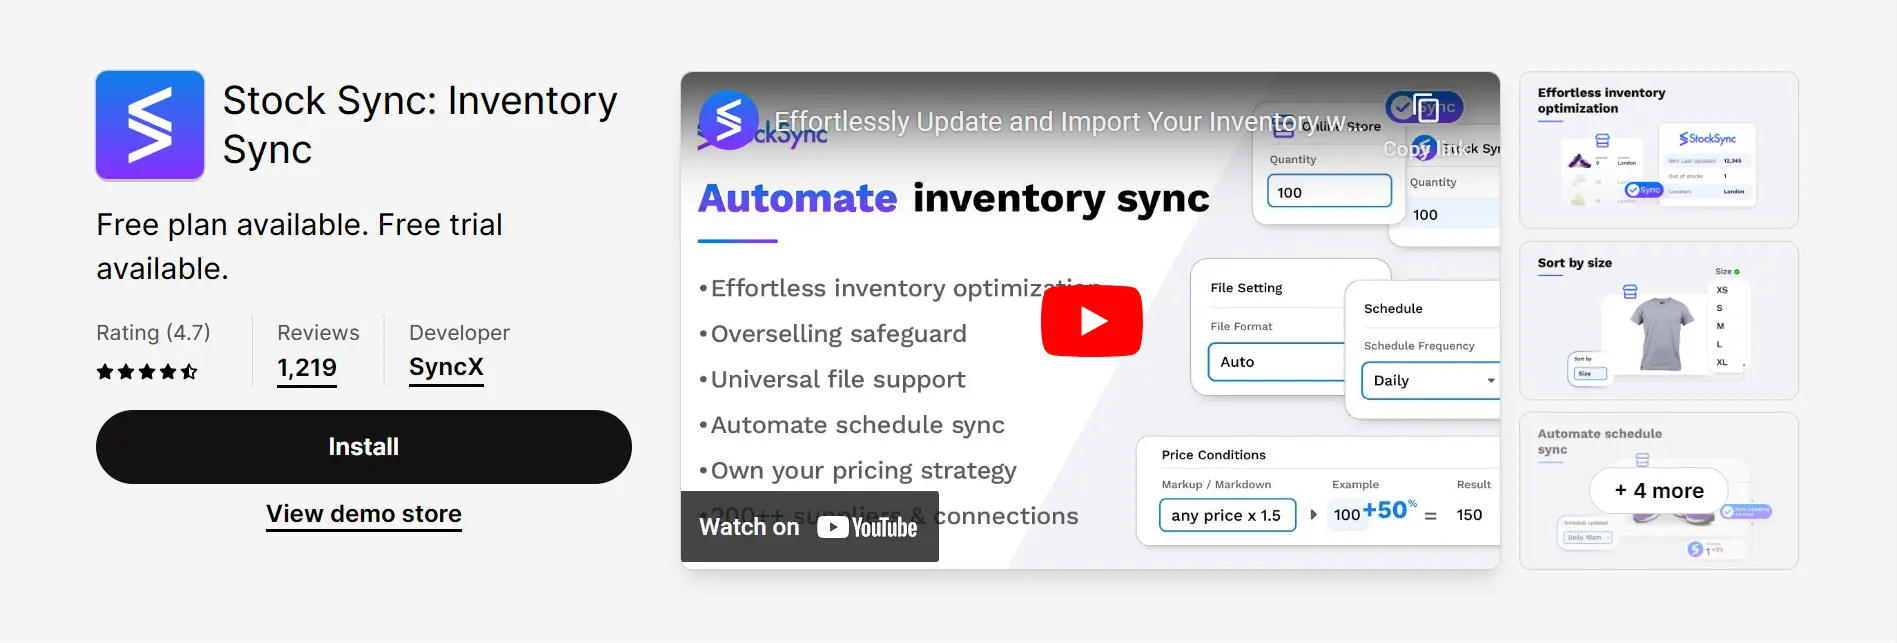 Stock Sync inventory management app for shopify